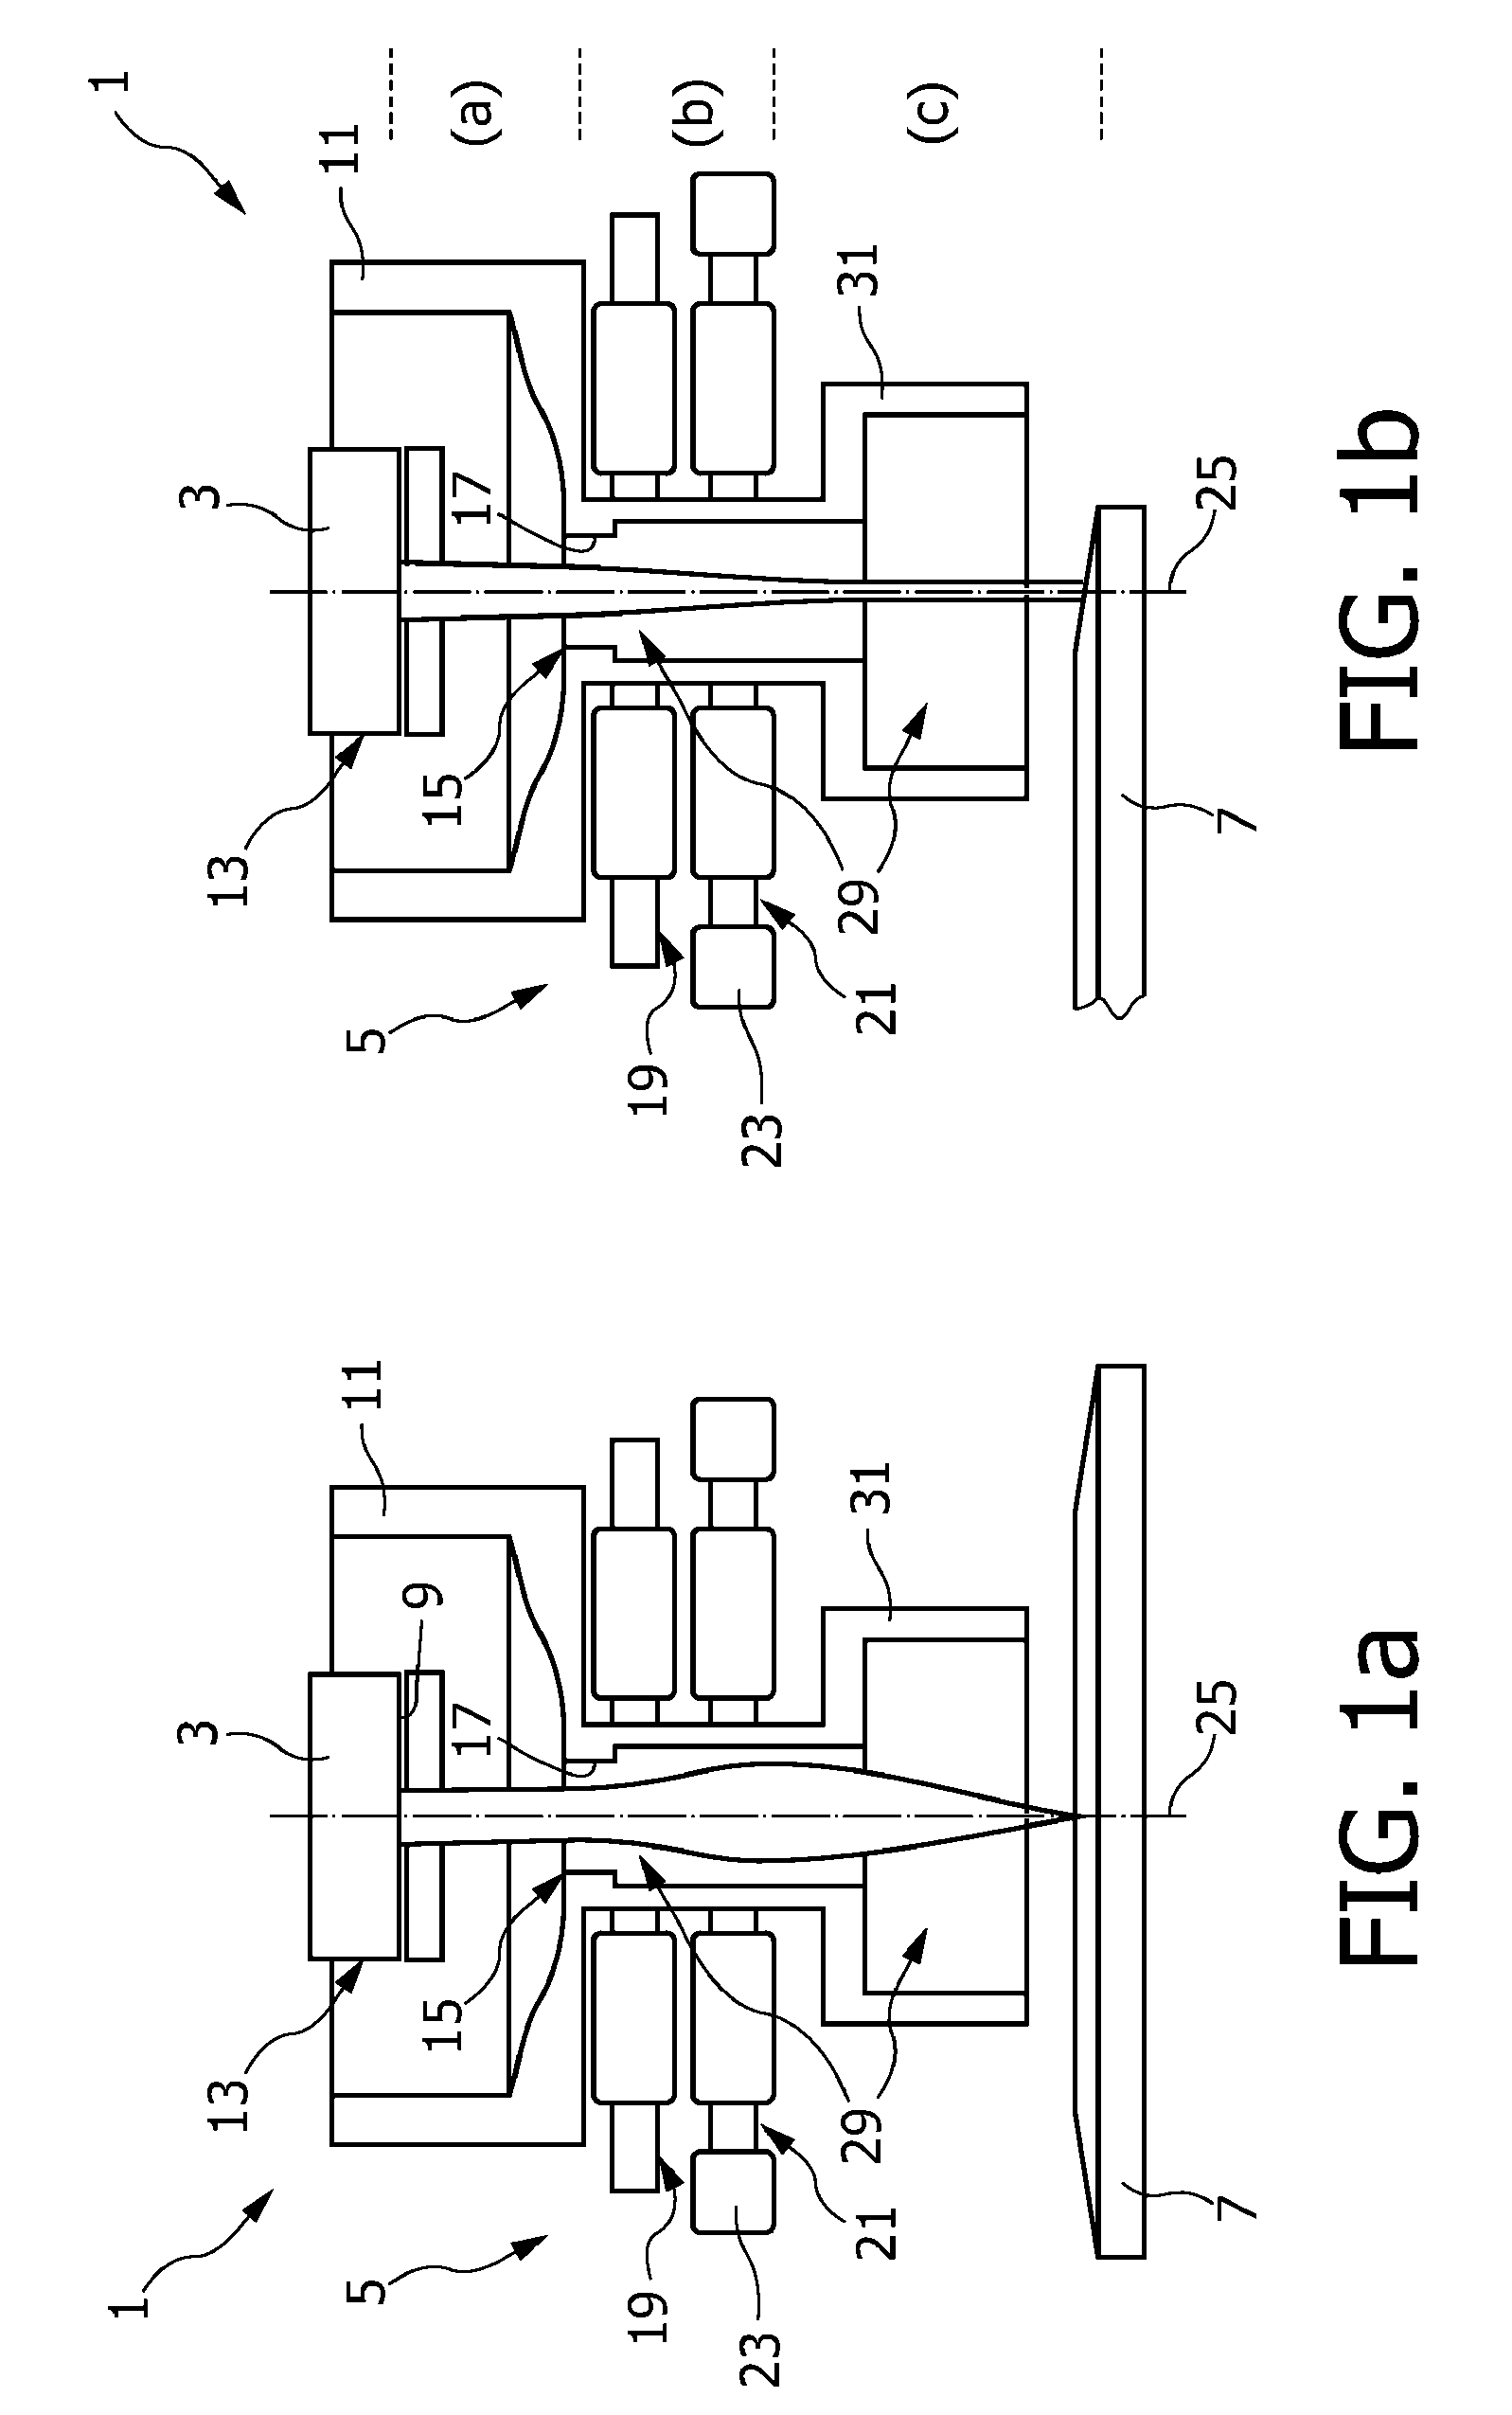 Electron optical apparatus, X-ray emitting device and method of producing an electron beam